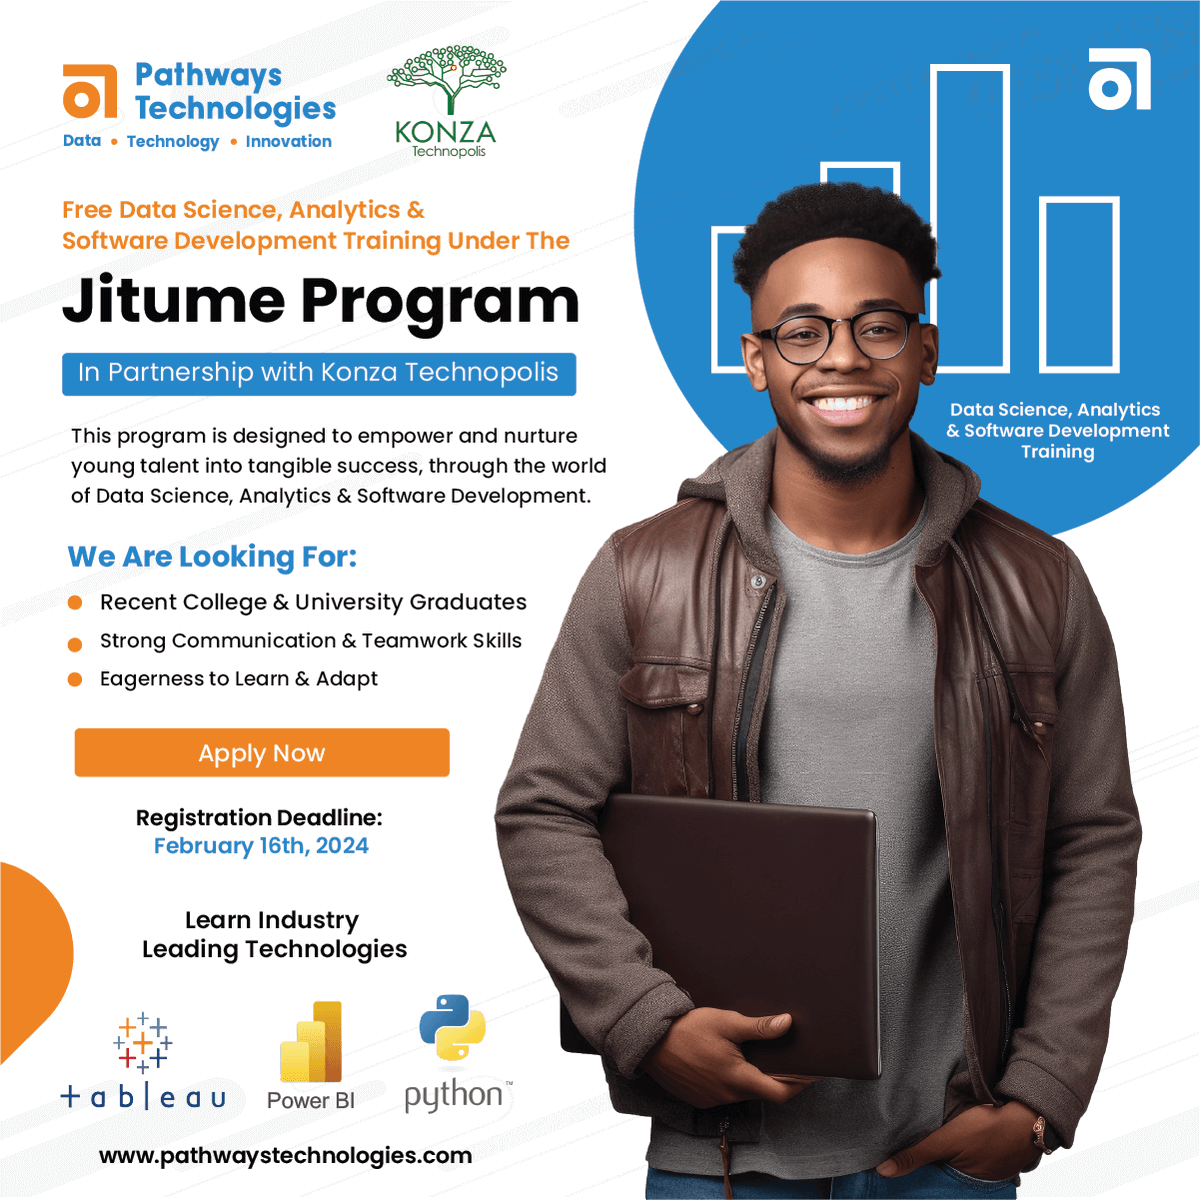 Are you a recent graduate passionate about #data and #technology?
This is for you! Sign up here: pathwaystechnologies.com/jitume-program/

#dataanalyst #datascientist #softwaredeveloper #computerscience #statistics #datasciencetraining #jitumeprogram #techskills #dataskills #empoweringyouth